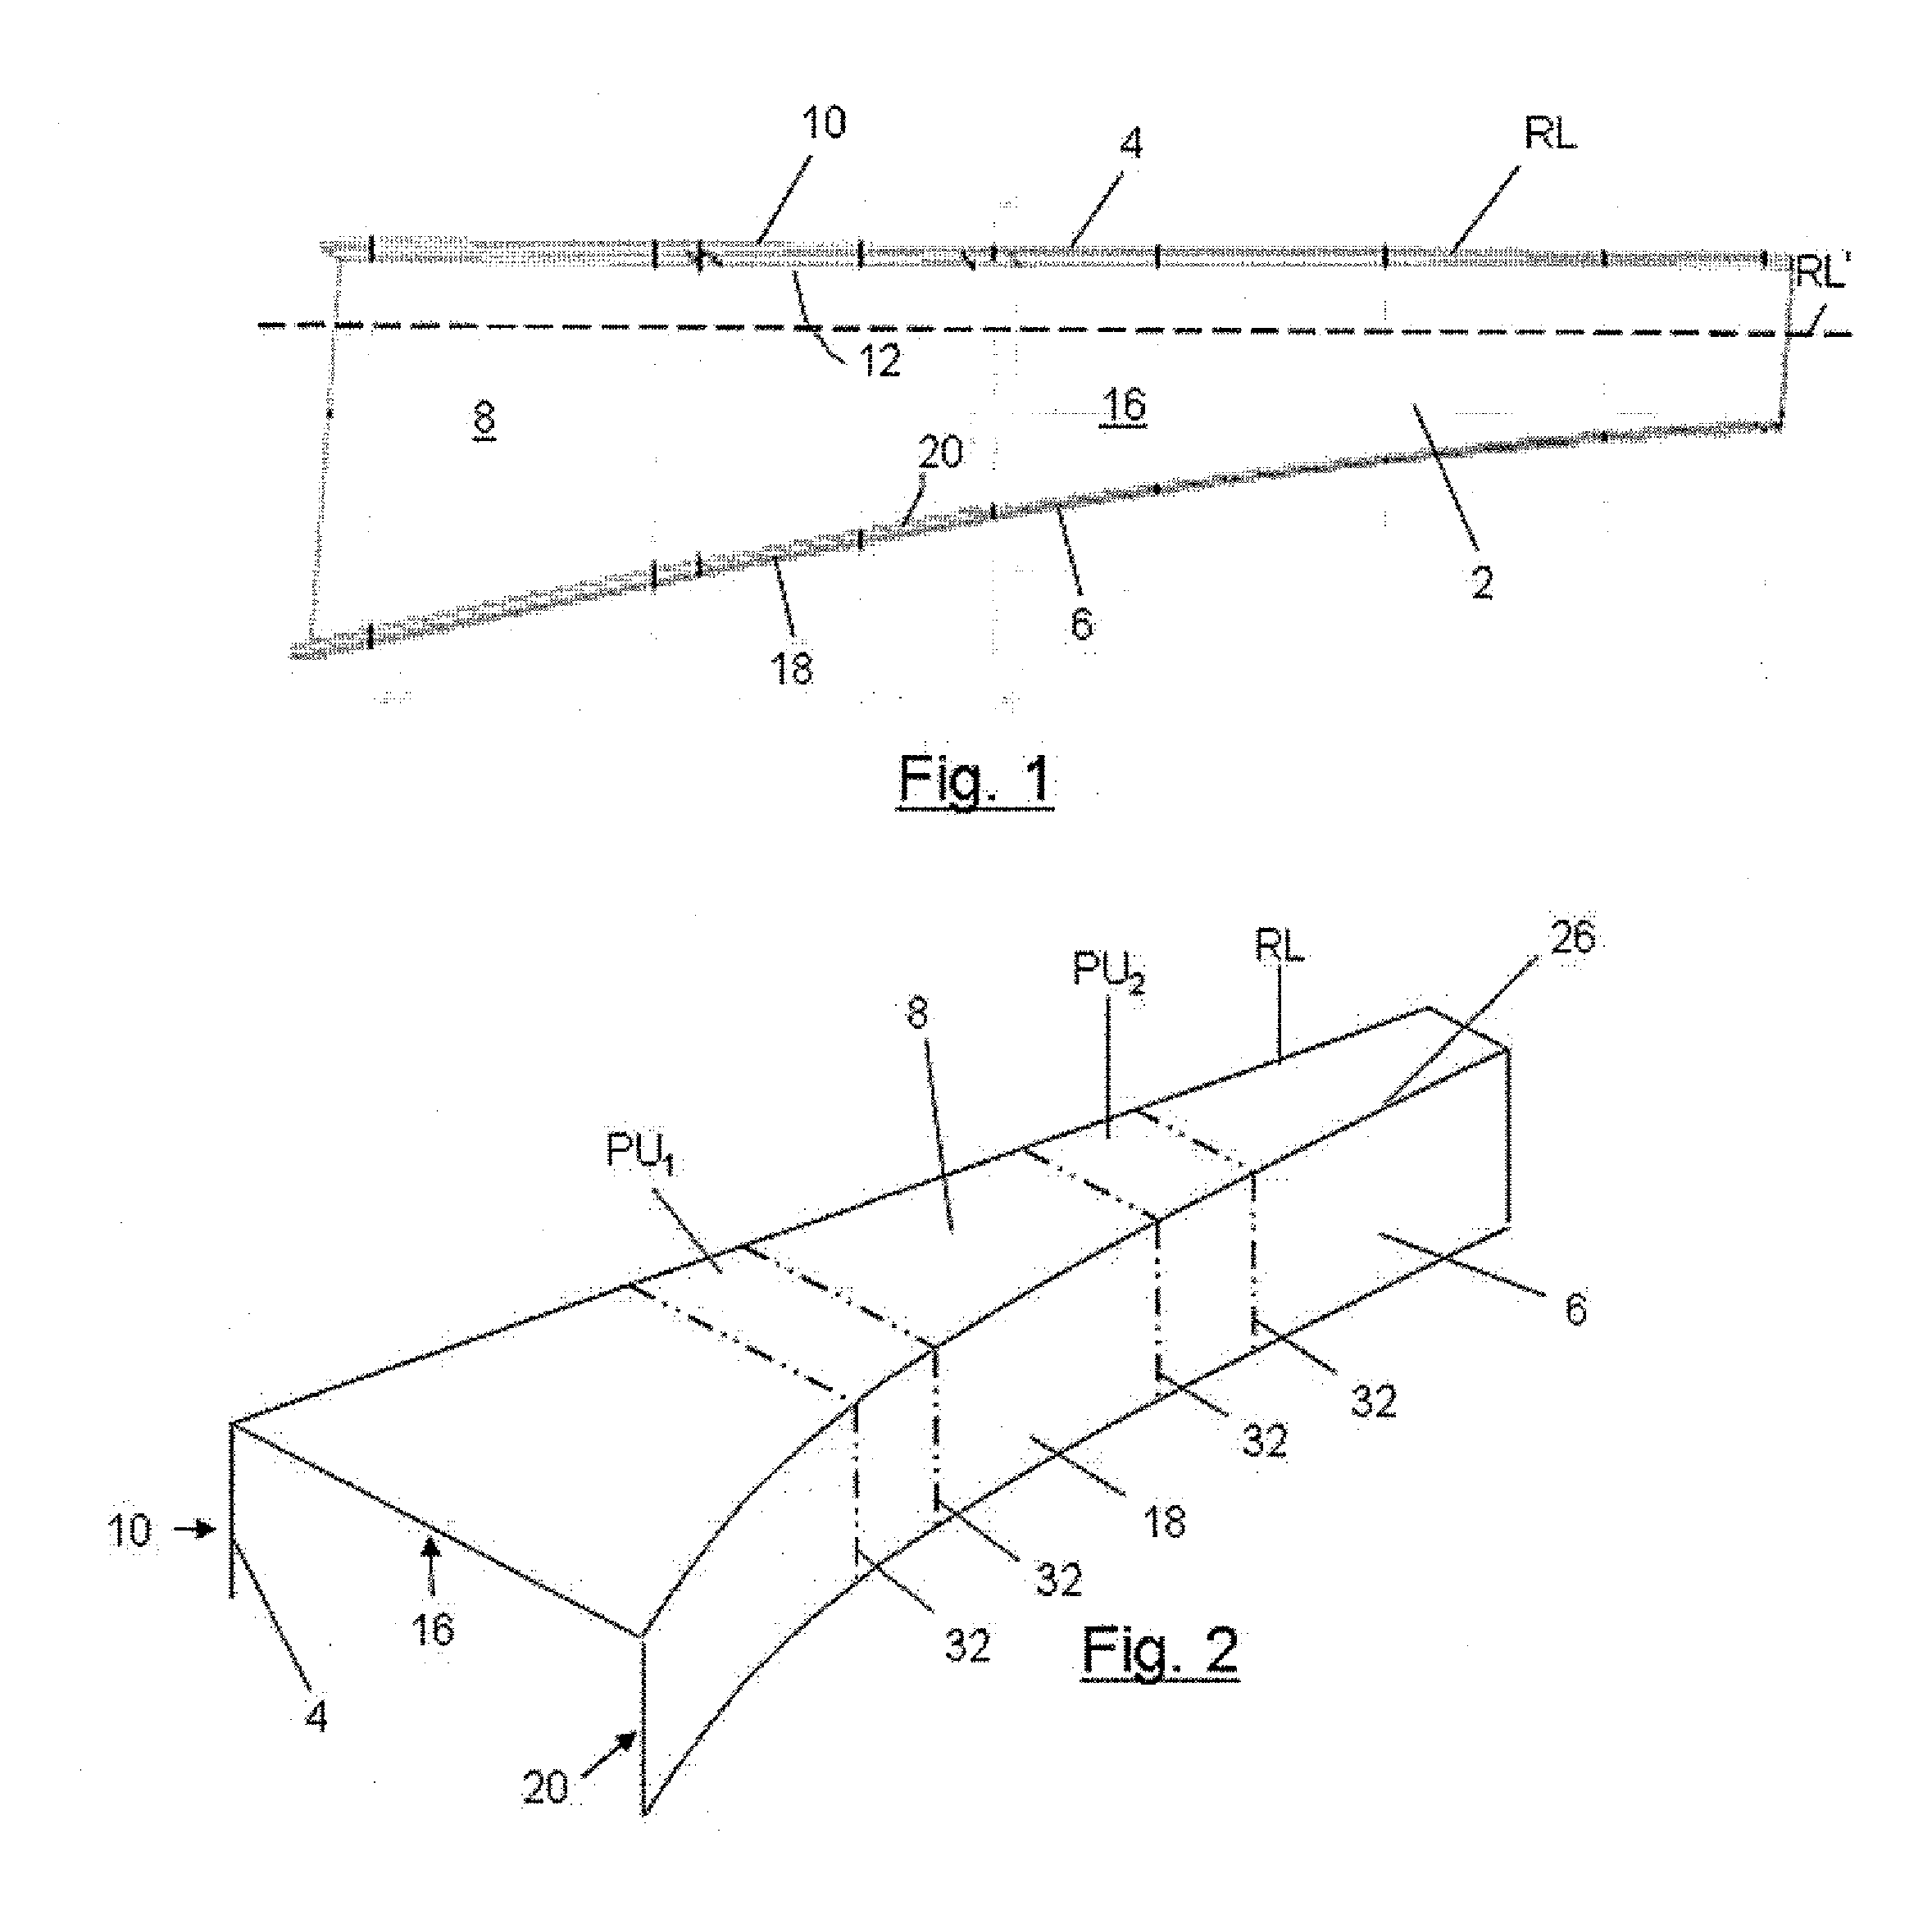 Elongate composite structural members and improvements therein